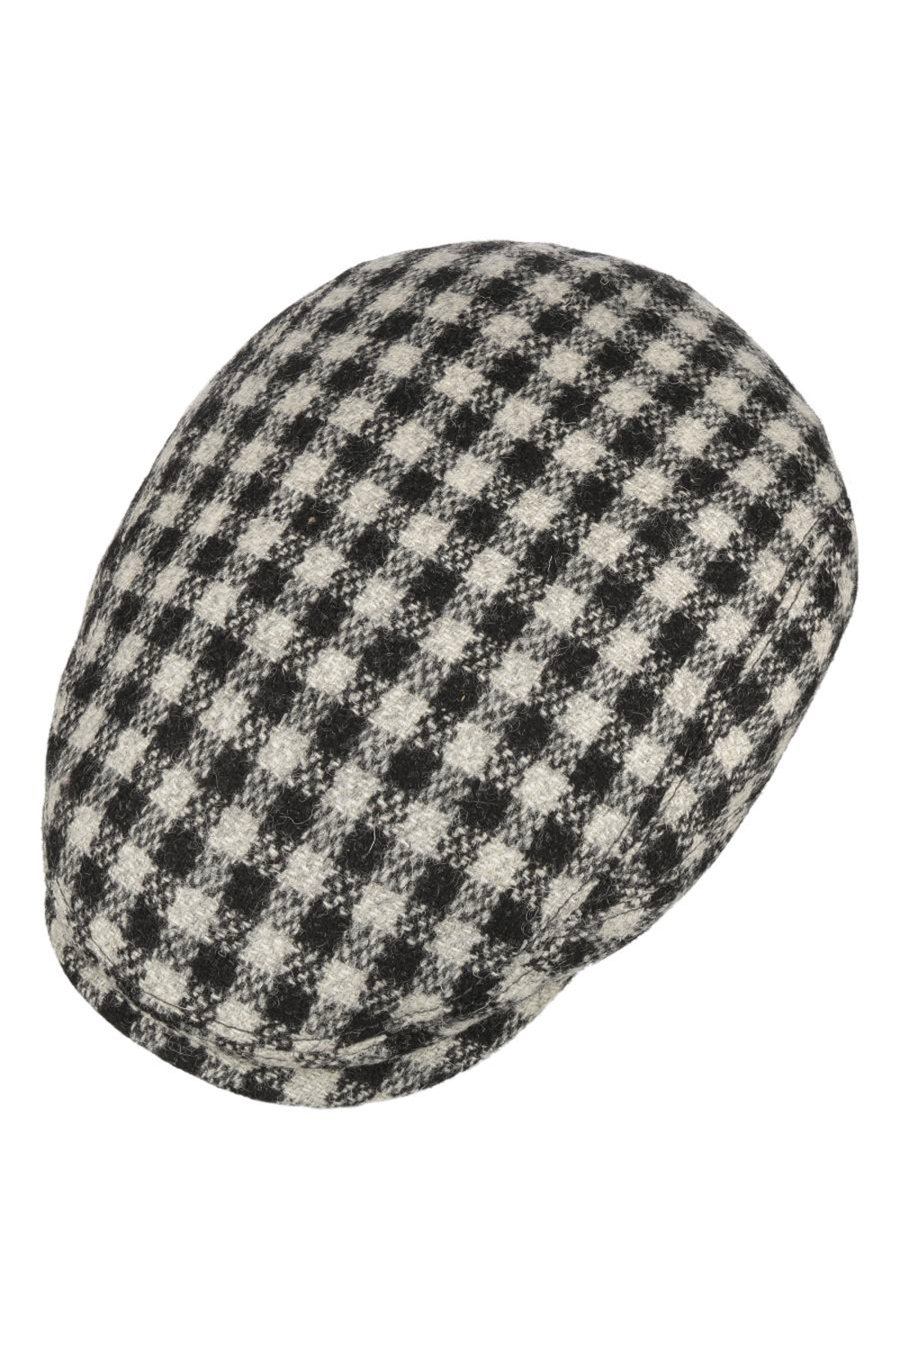 Buy the Stetson Harris Tweed Twotone Check Flat Cap Black/White at Intro. Spend £100 for free next day UK delivery. Official stockists. We ship worldwide